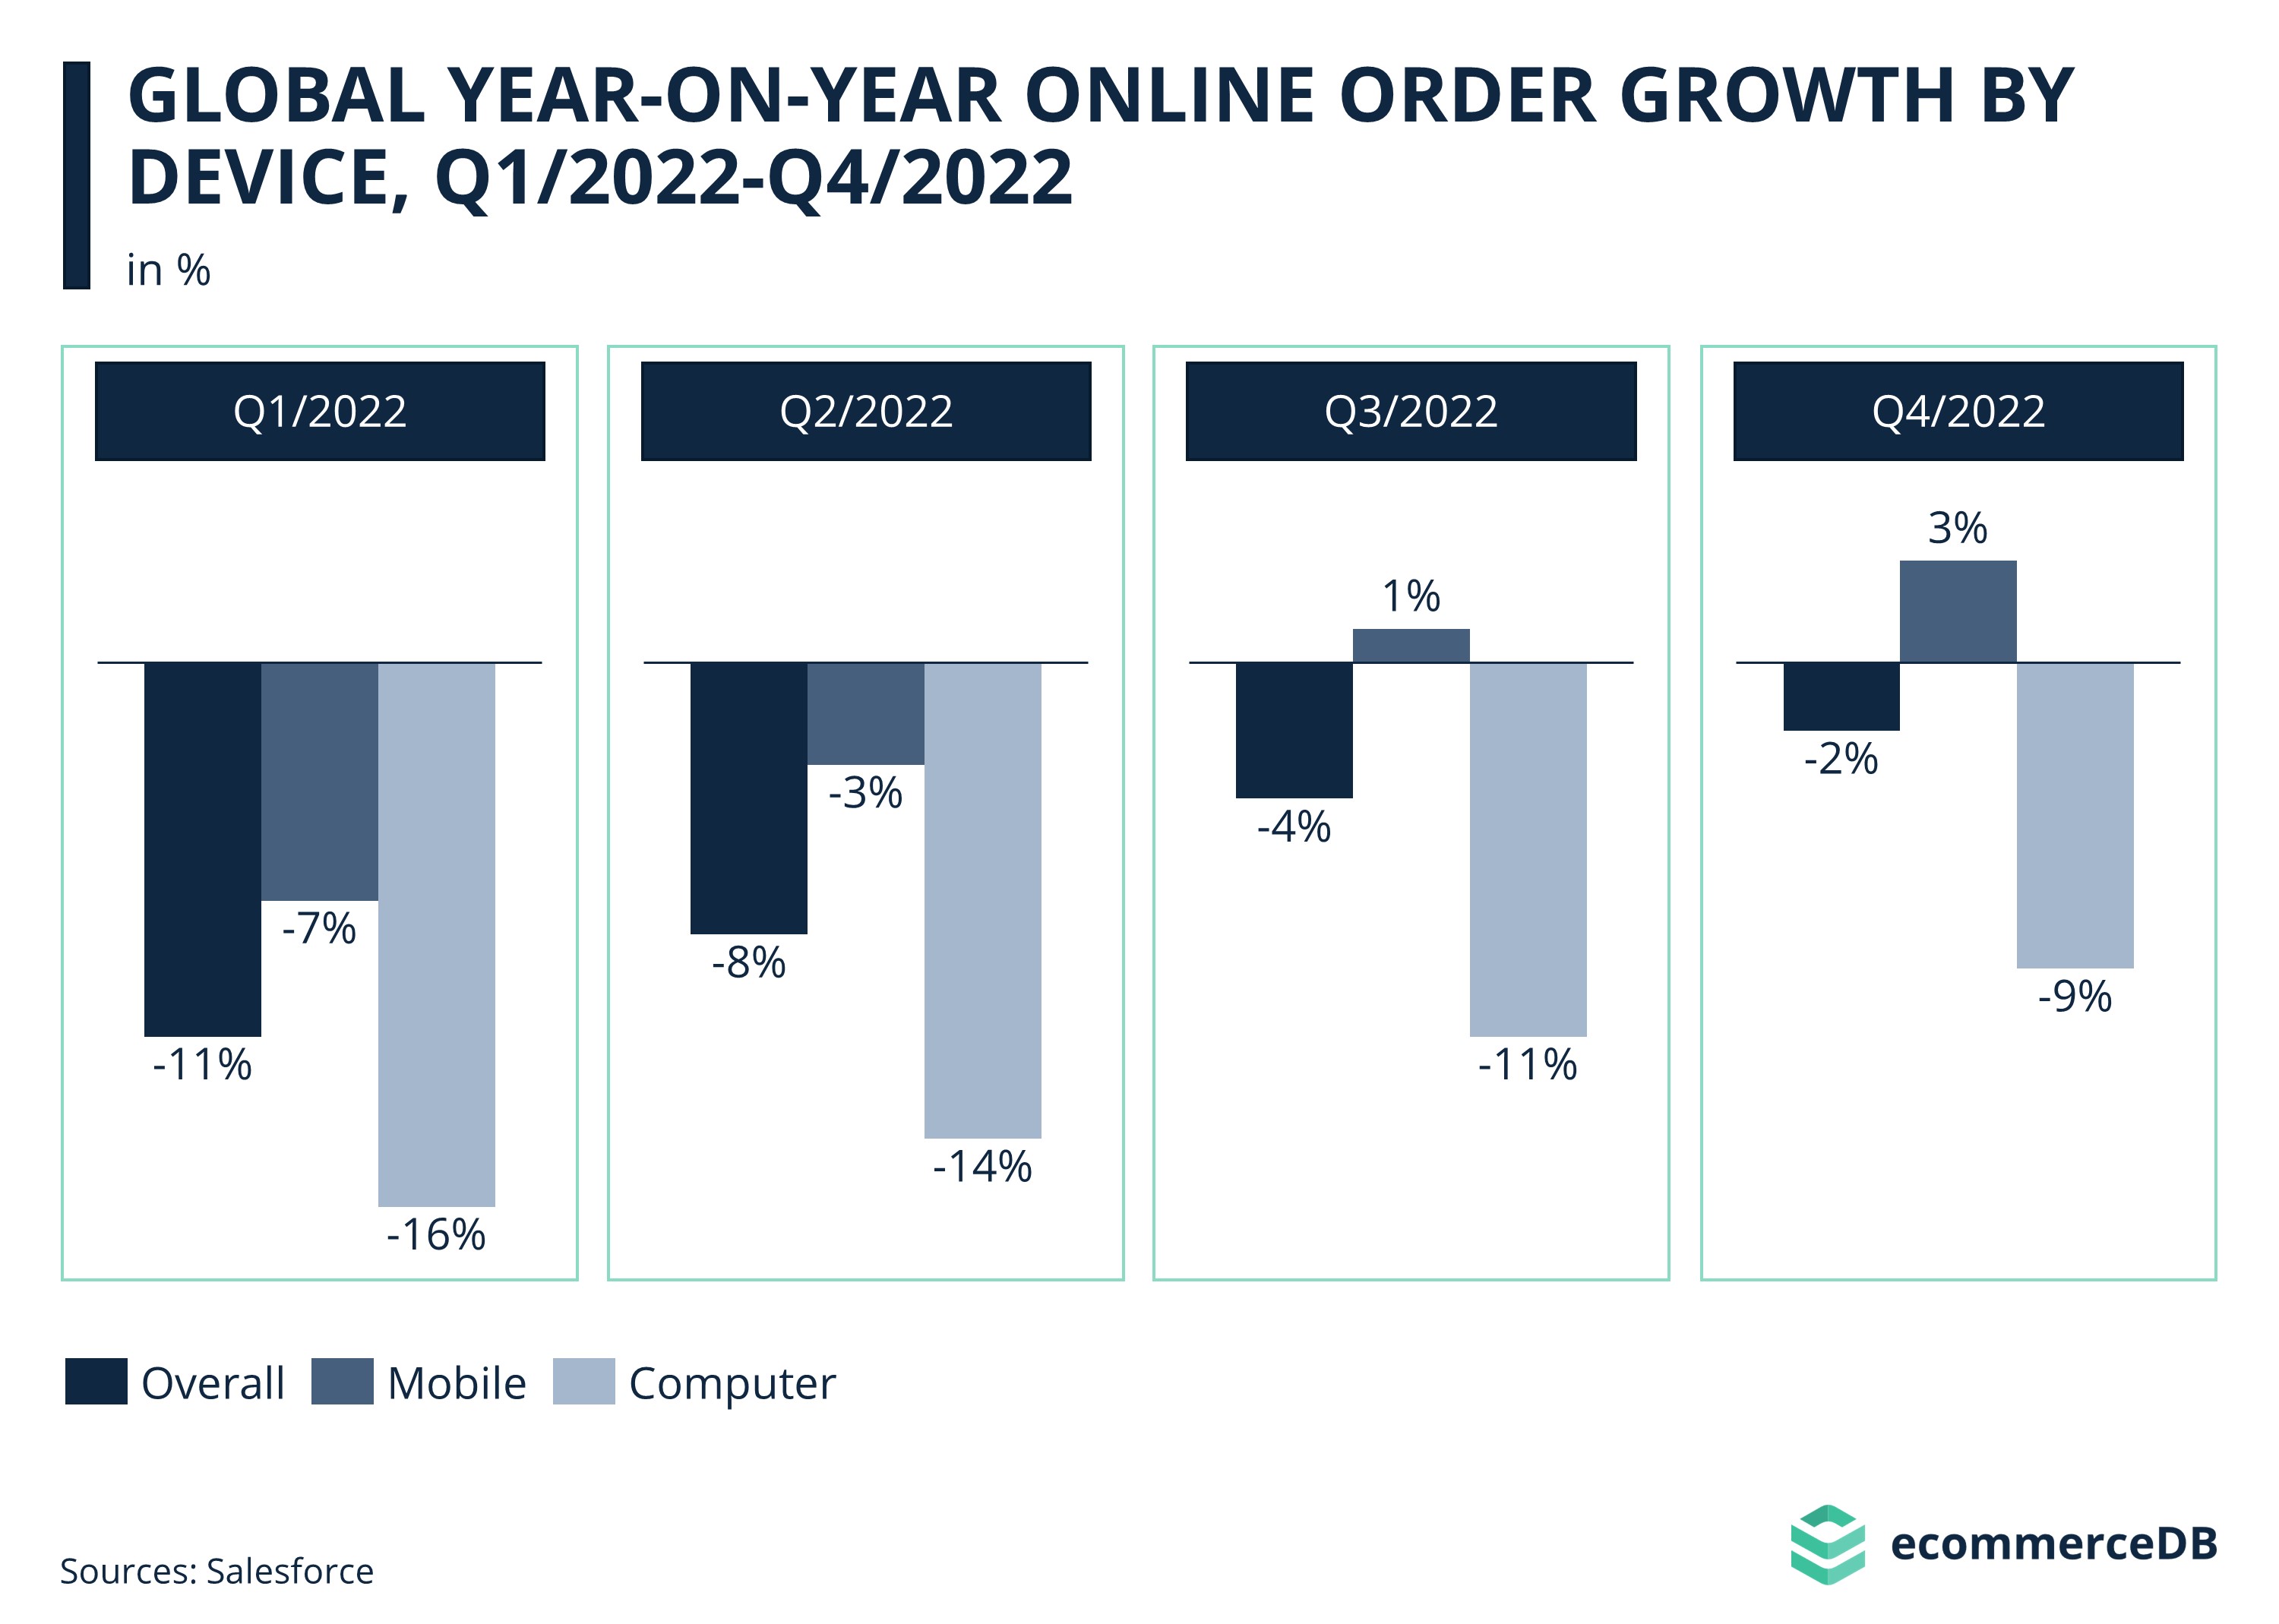 Global Year-on-Year Online Order Growth by Device, Q1/2022-Q4/2022